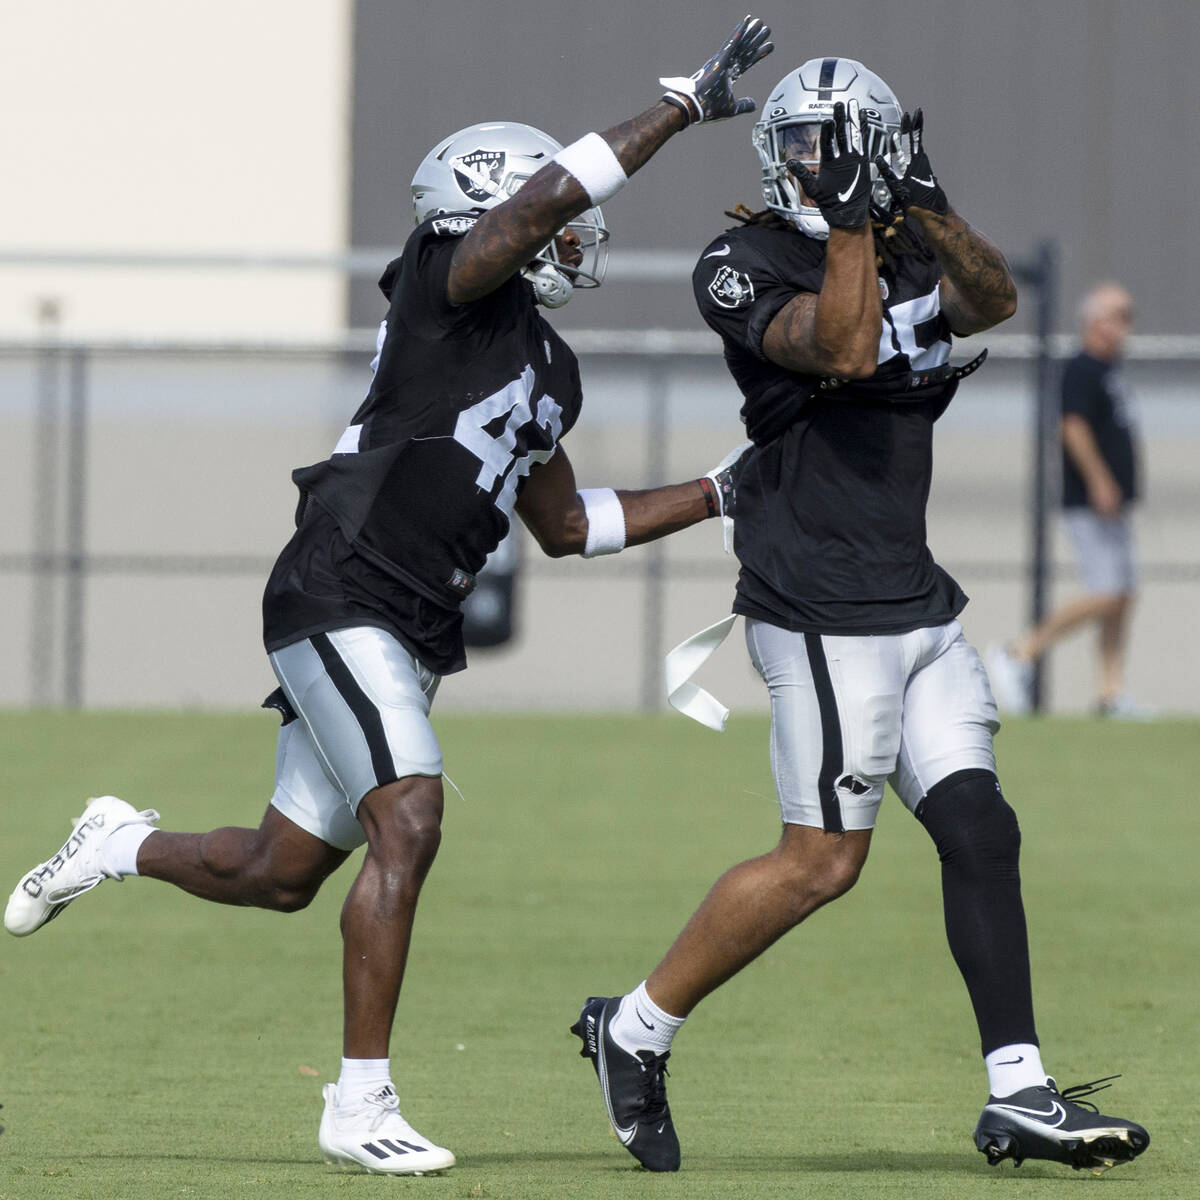 Raiders safety Qwynnterrio Cole (42) works with safety Tre'von Moehrig (25) during a drill at t ...